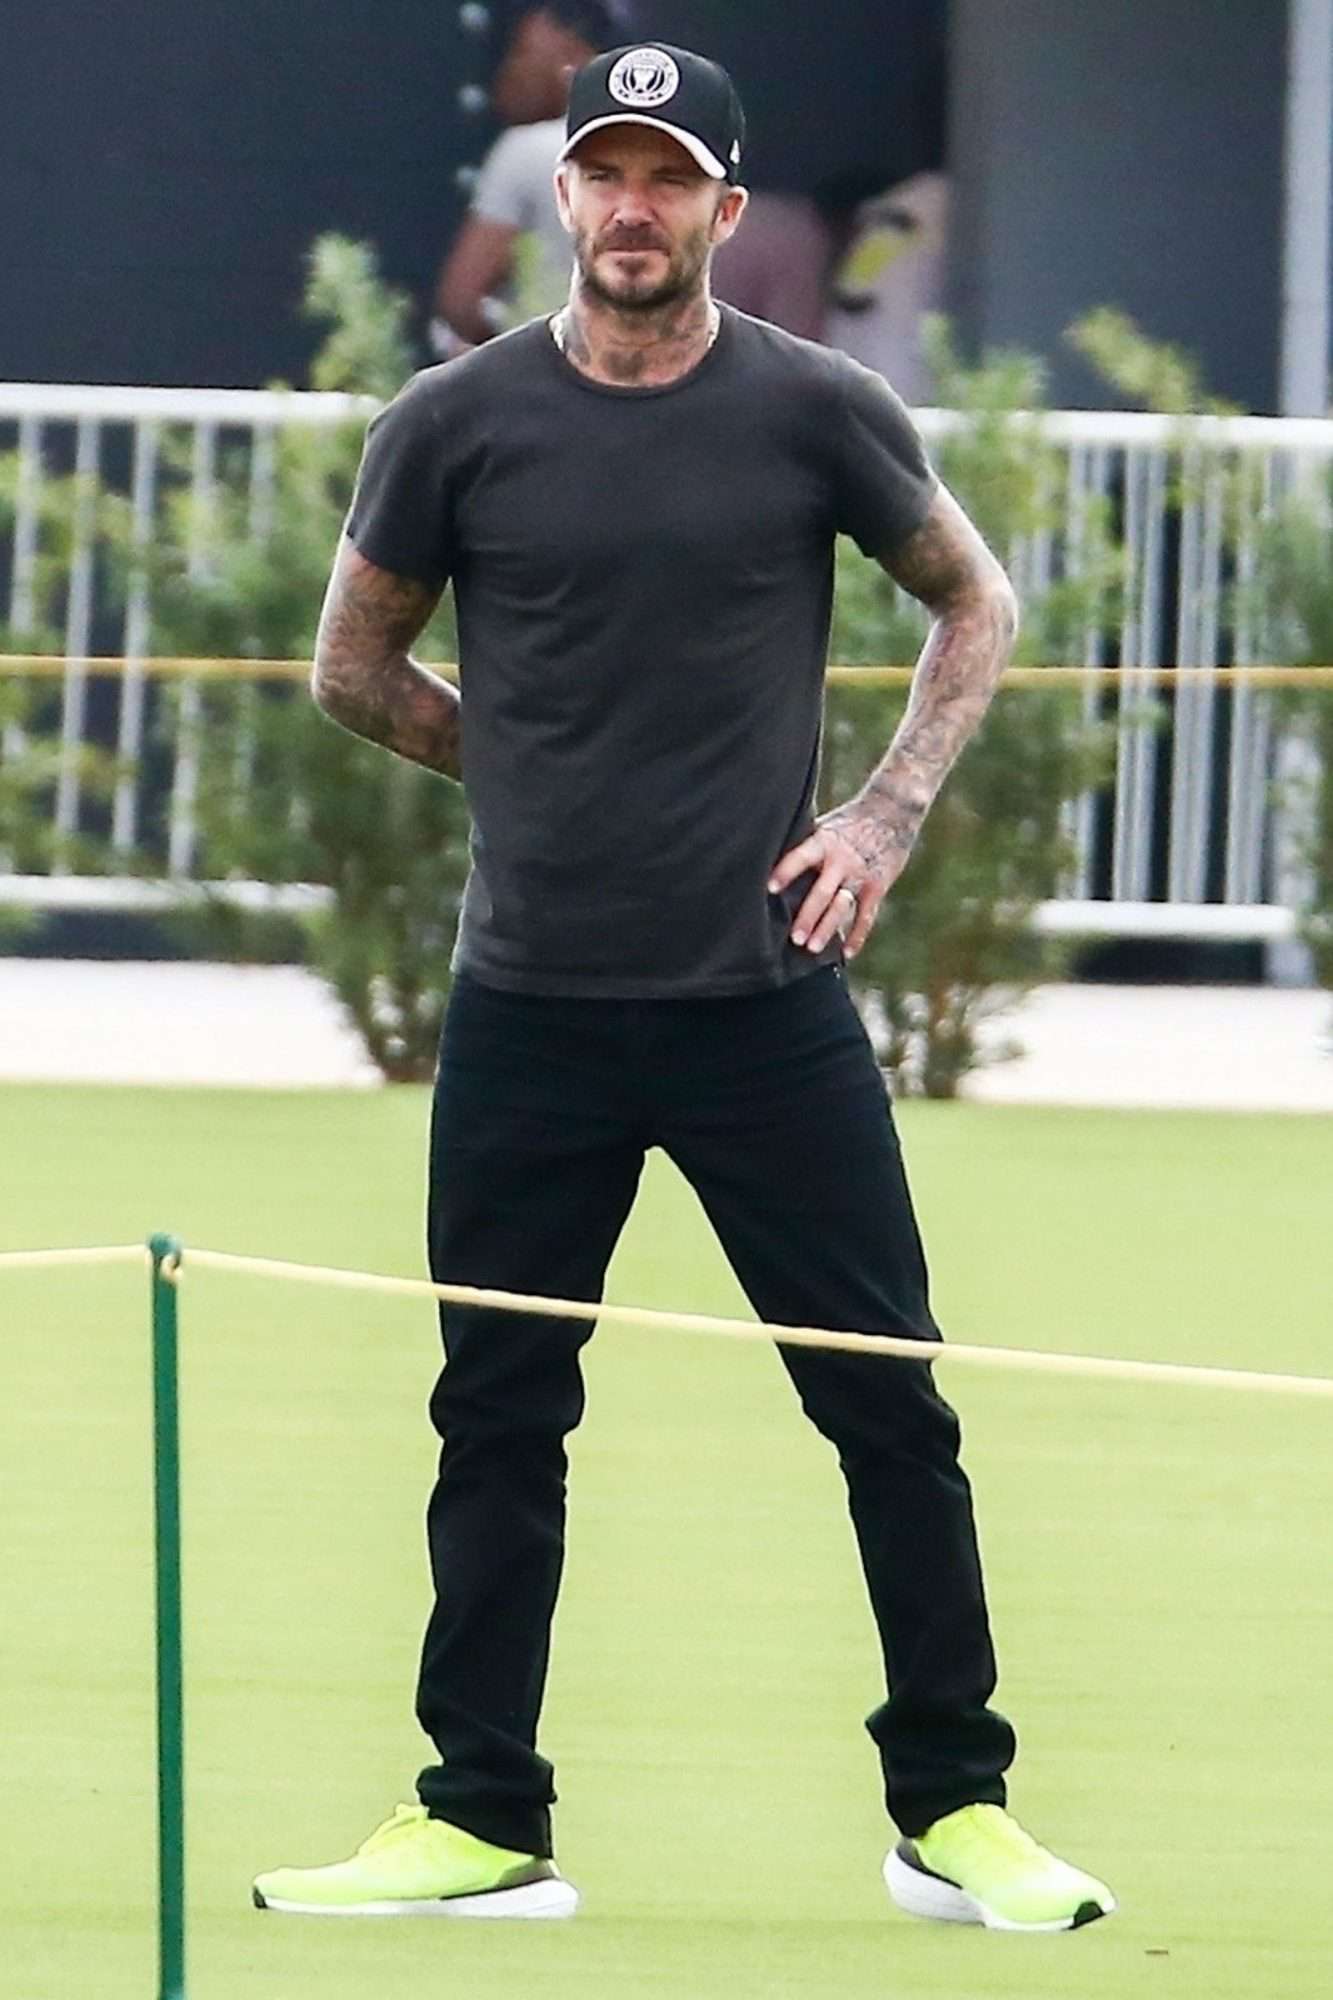 David Beckham skips the face mask while attending the training of his Inter Miami team in Florida